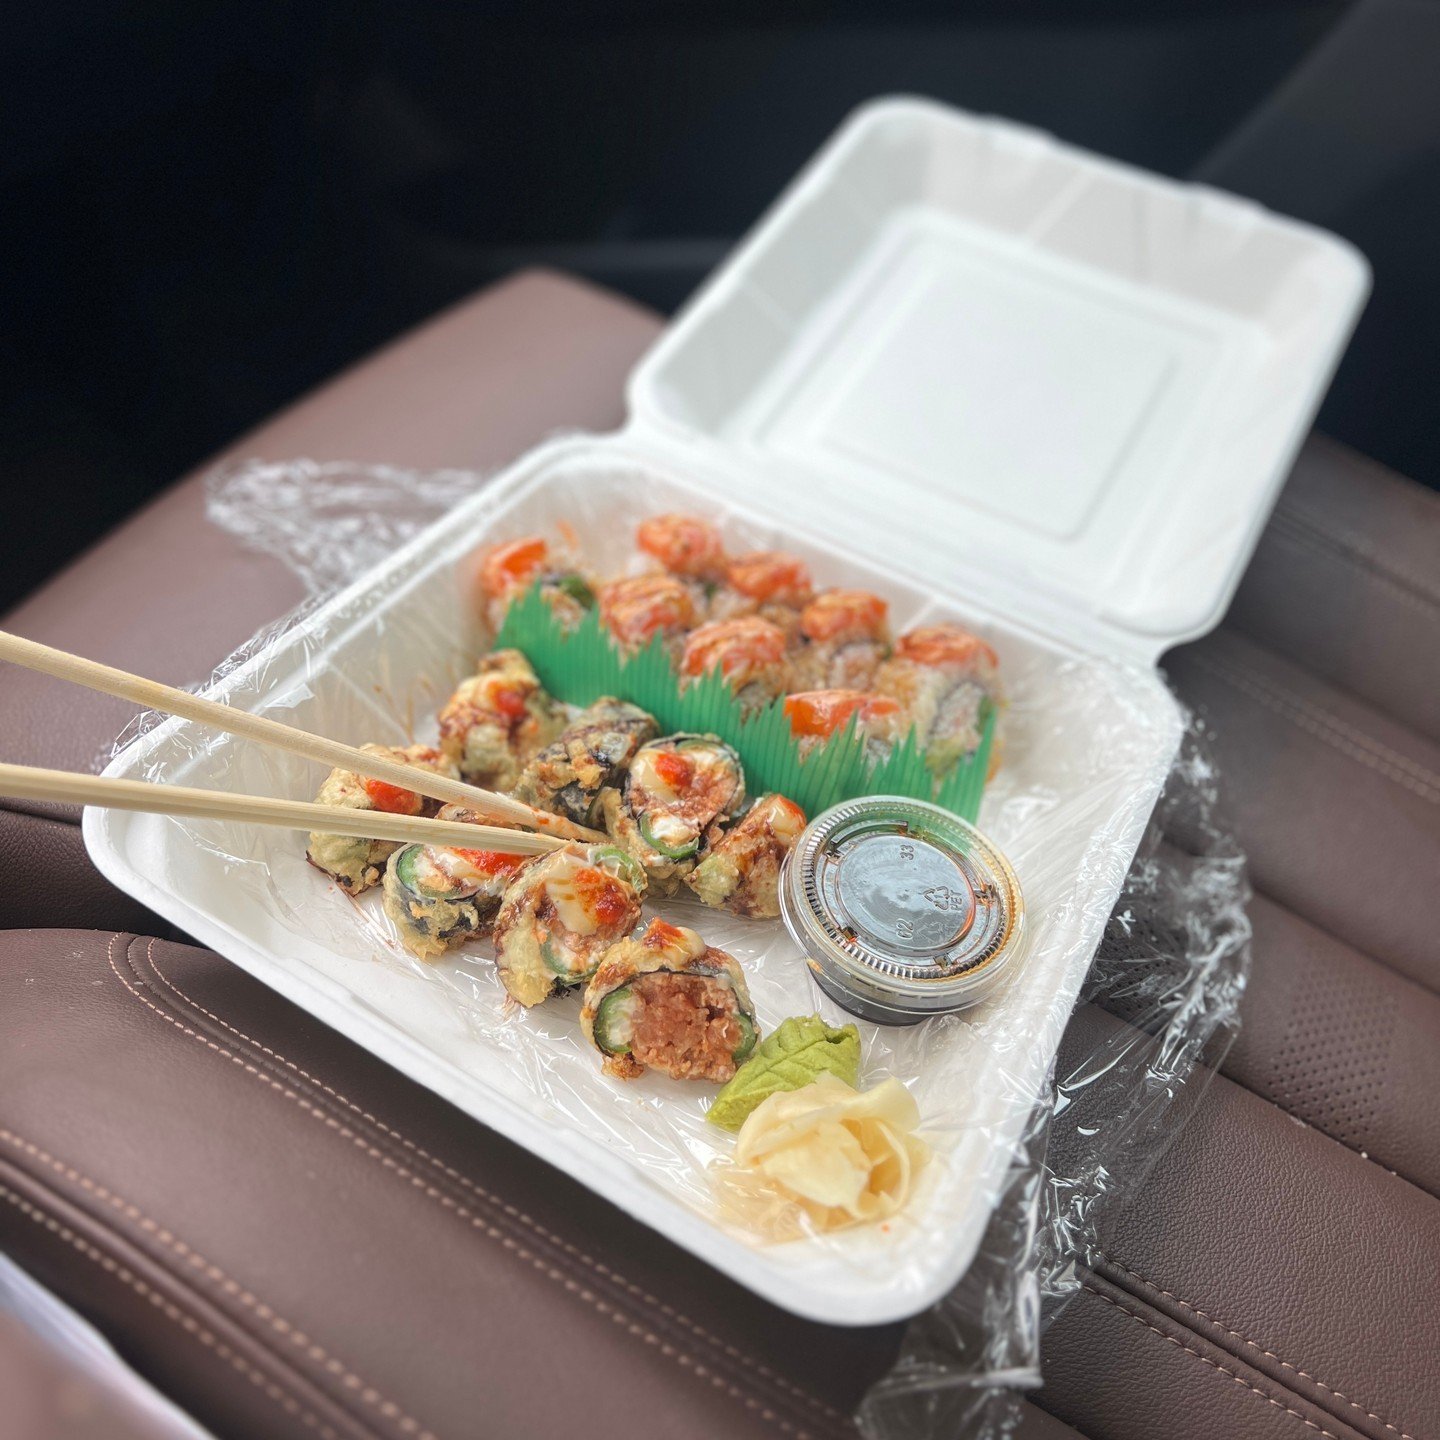 Warm weather and long weekends are made for roadtrips, and no adventure is complete without car snacks! So wherever your Memorial Day plans are taking you, put down the grocery store sushi and make one more pit stop on your way out of town because Ja